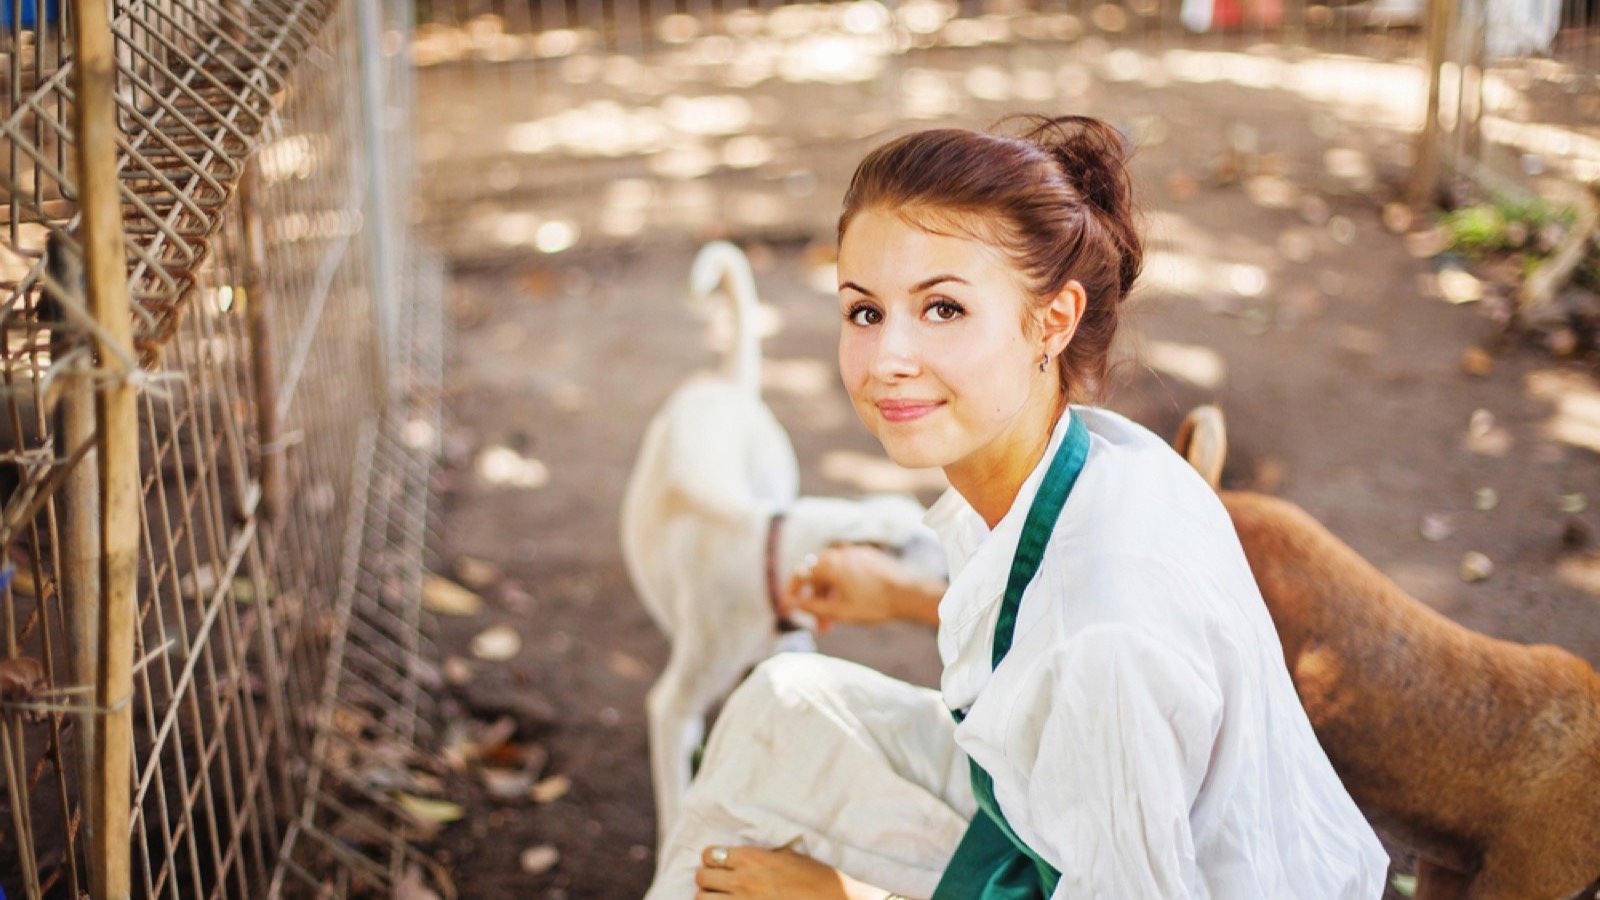 <p>Volunteering can become a rewarding hobby if you choose a charity genre that interests you. For example, volunteer at an animal charity or a wildlife center if you love pets. They always need help with the animals, such as feeding, exercising, cleaning out kennels and stalls, or raising vital funds.</p>